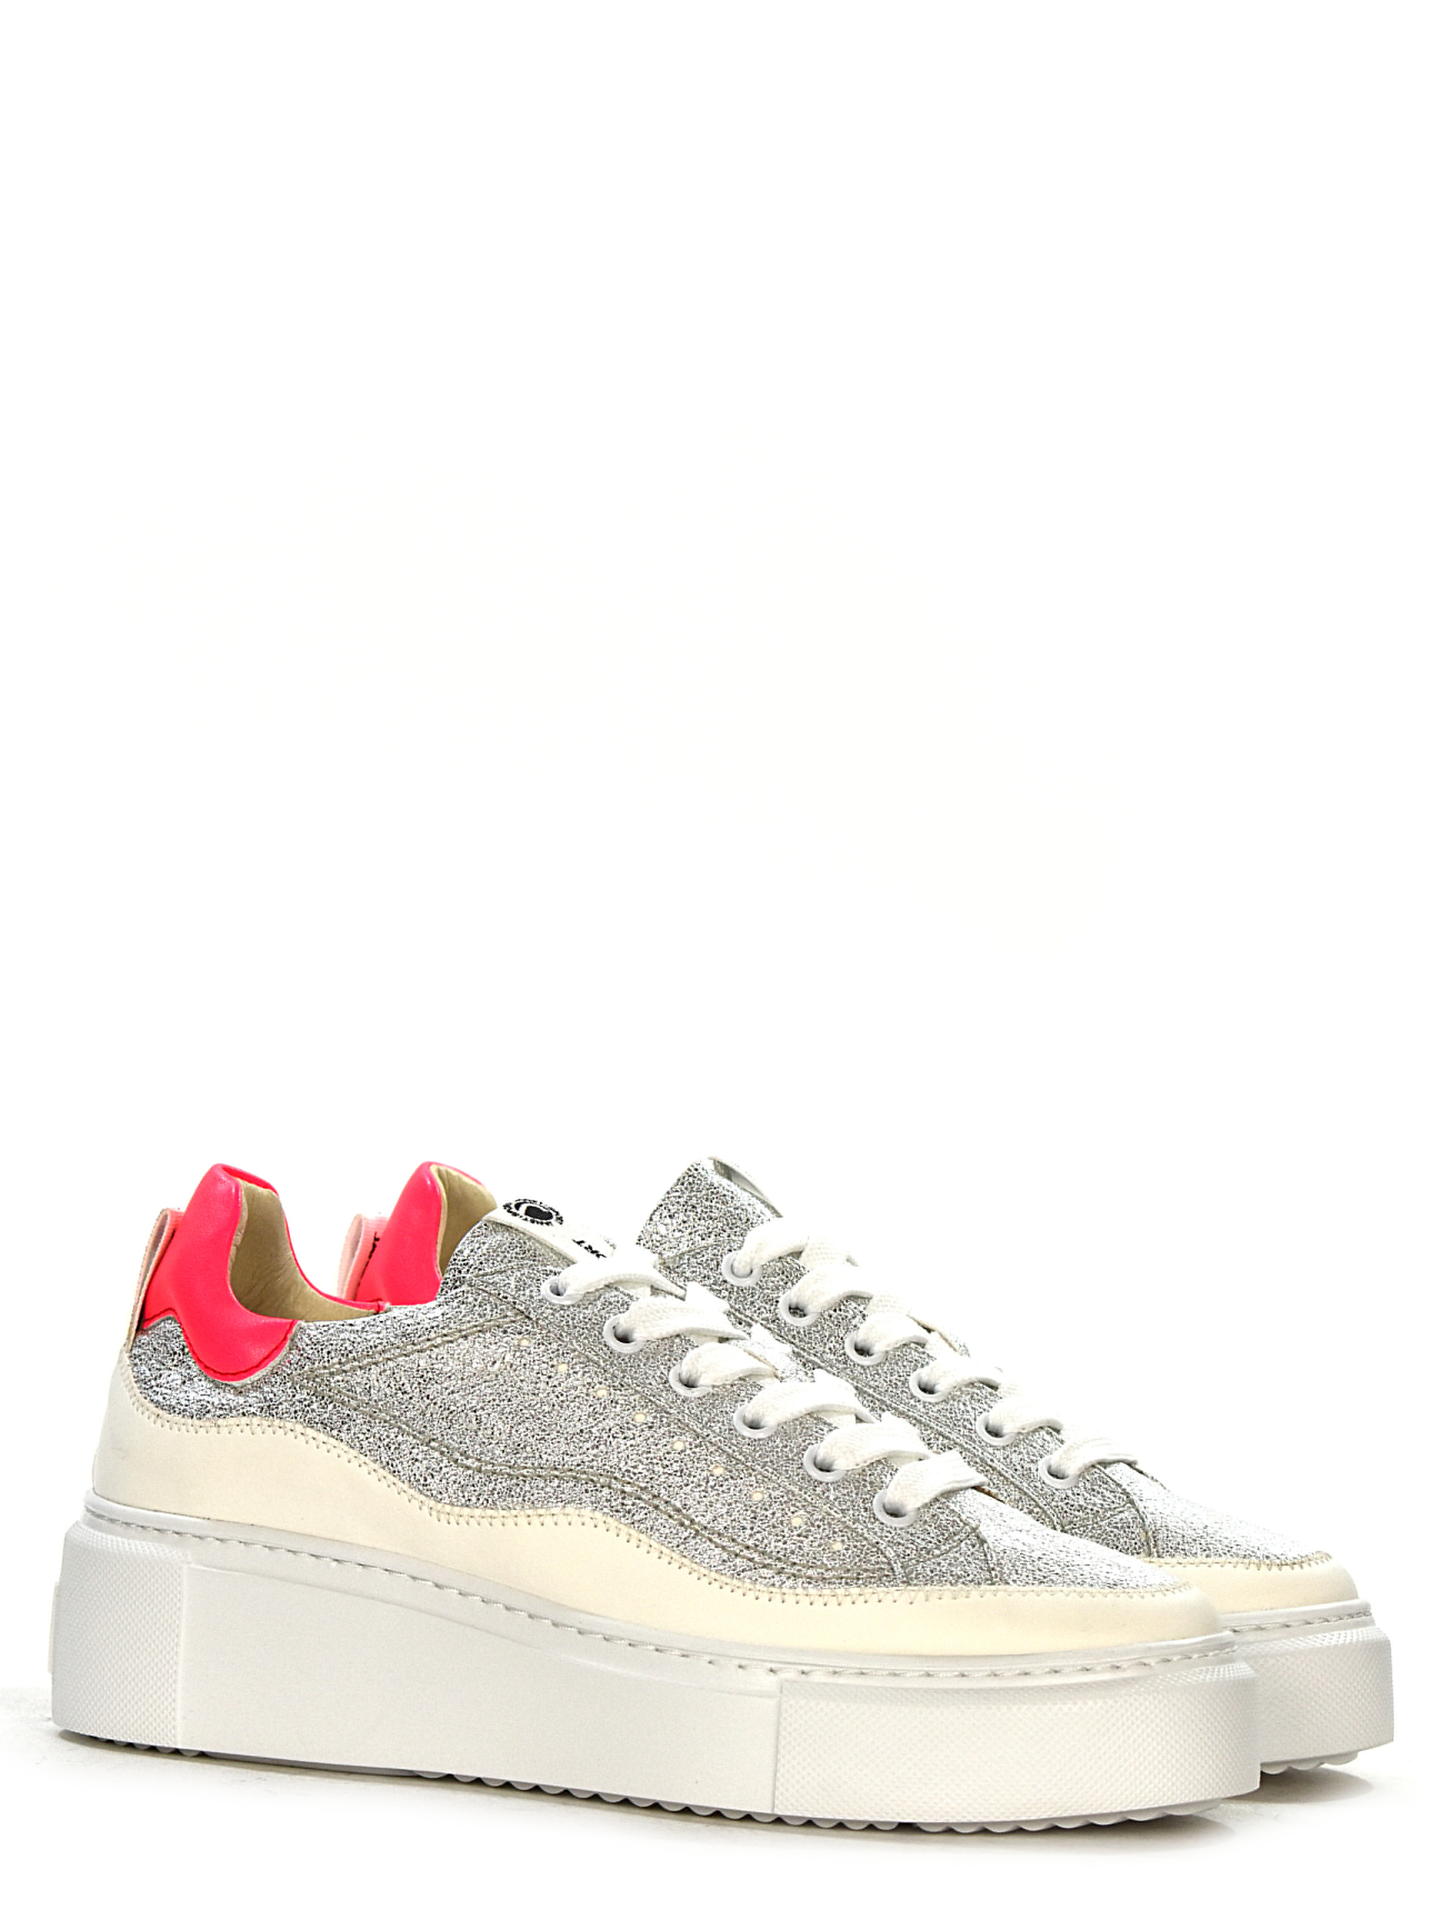 SNEAKERS JANET SPORT 45828 ARGENTO | DESIDERIO COLLECTION